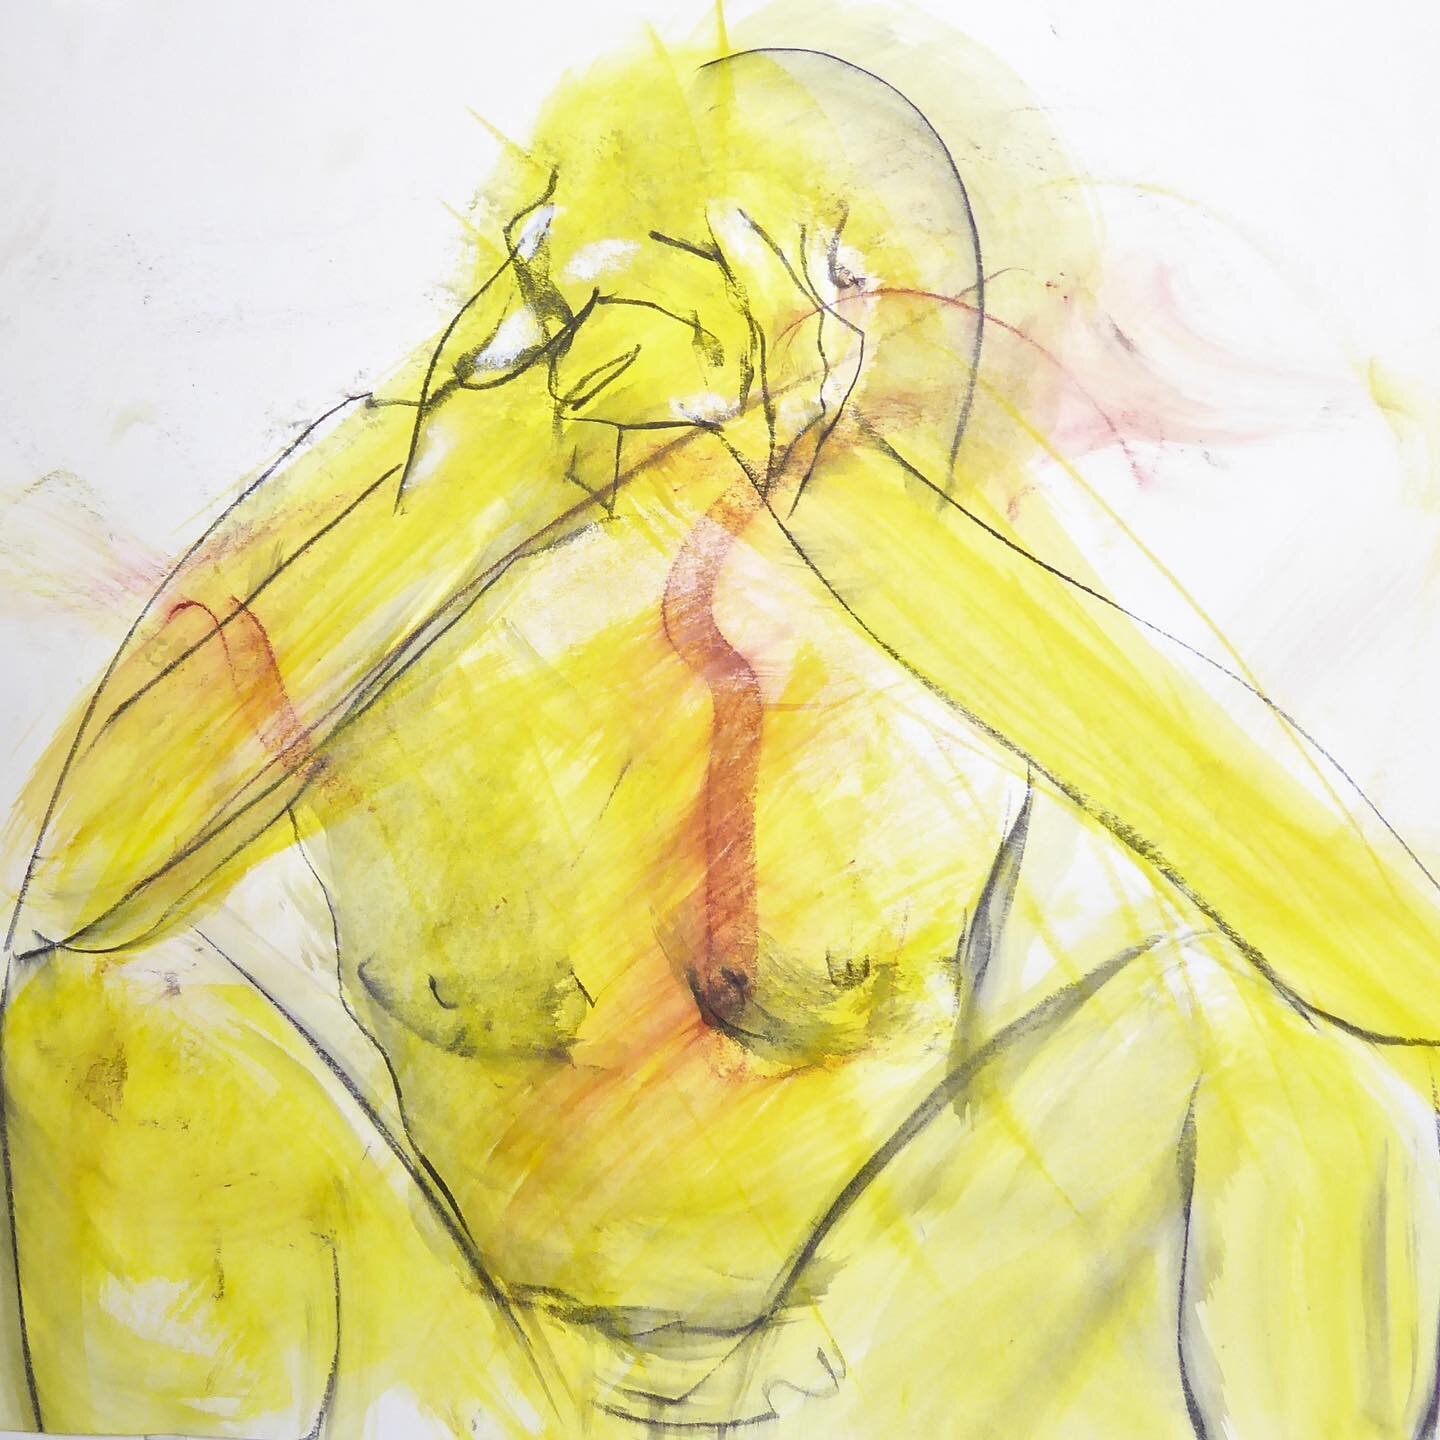 Yellow is the color of warmth, and of jealousy. Irene&rsquo;s session last night was gesture, close-ups, hands. Fab. Works on A2 white paper, 42x60cm, w Graf watercolor pigment and white pastel. #lifestudy #akt #lifedrawingsession #figuredrawing #akt